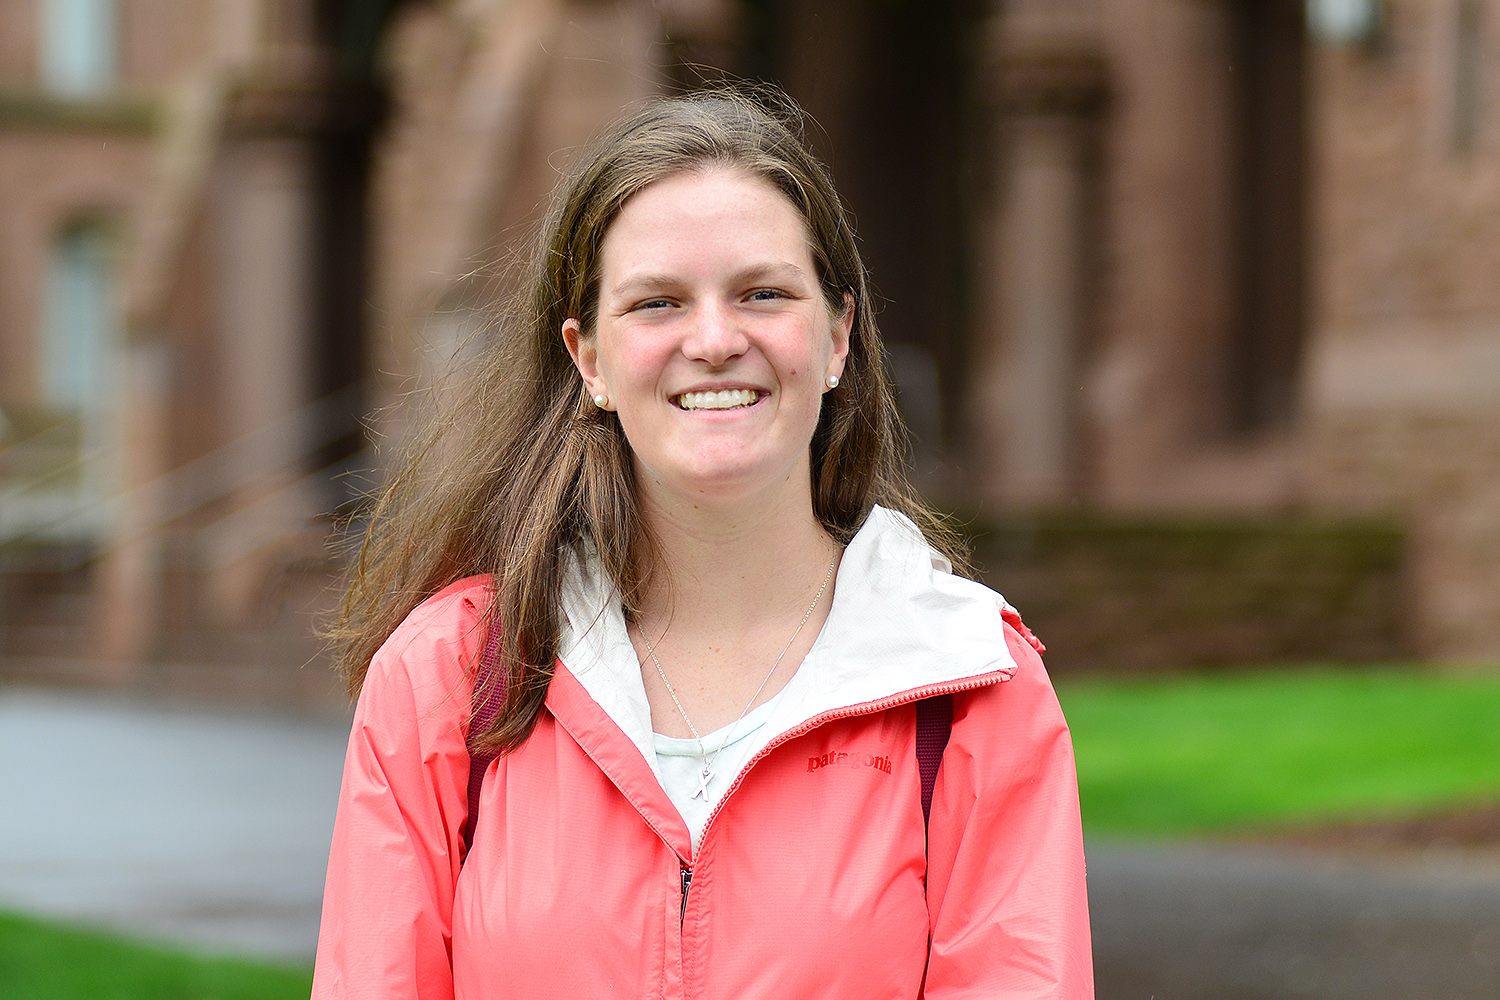 Emma Porrazzo '19 is one of 550 American students in the U.S. to receive a Critical Language Scholarship. She will spend about eight weeks abroad learning the Chinese language and culture in Suzhou, China. (Photo by Olivia Drake)